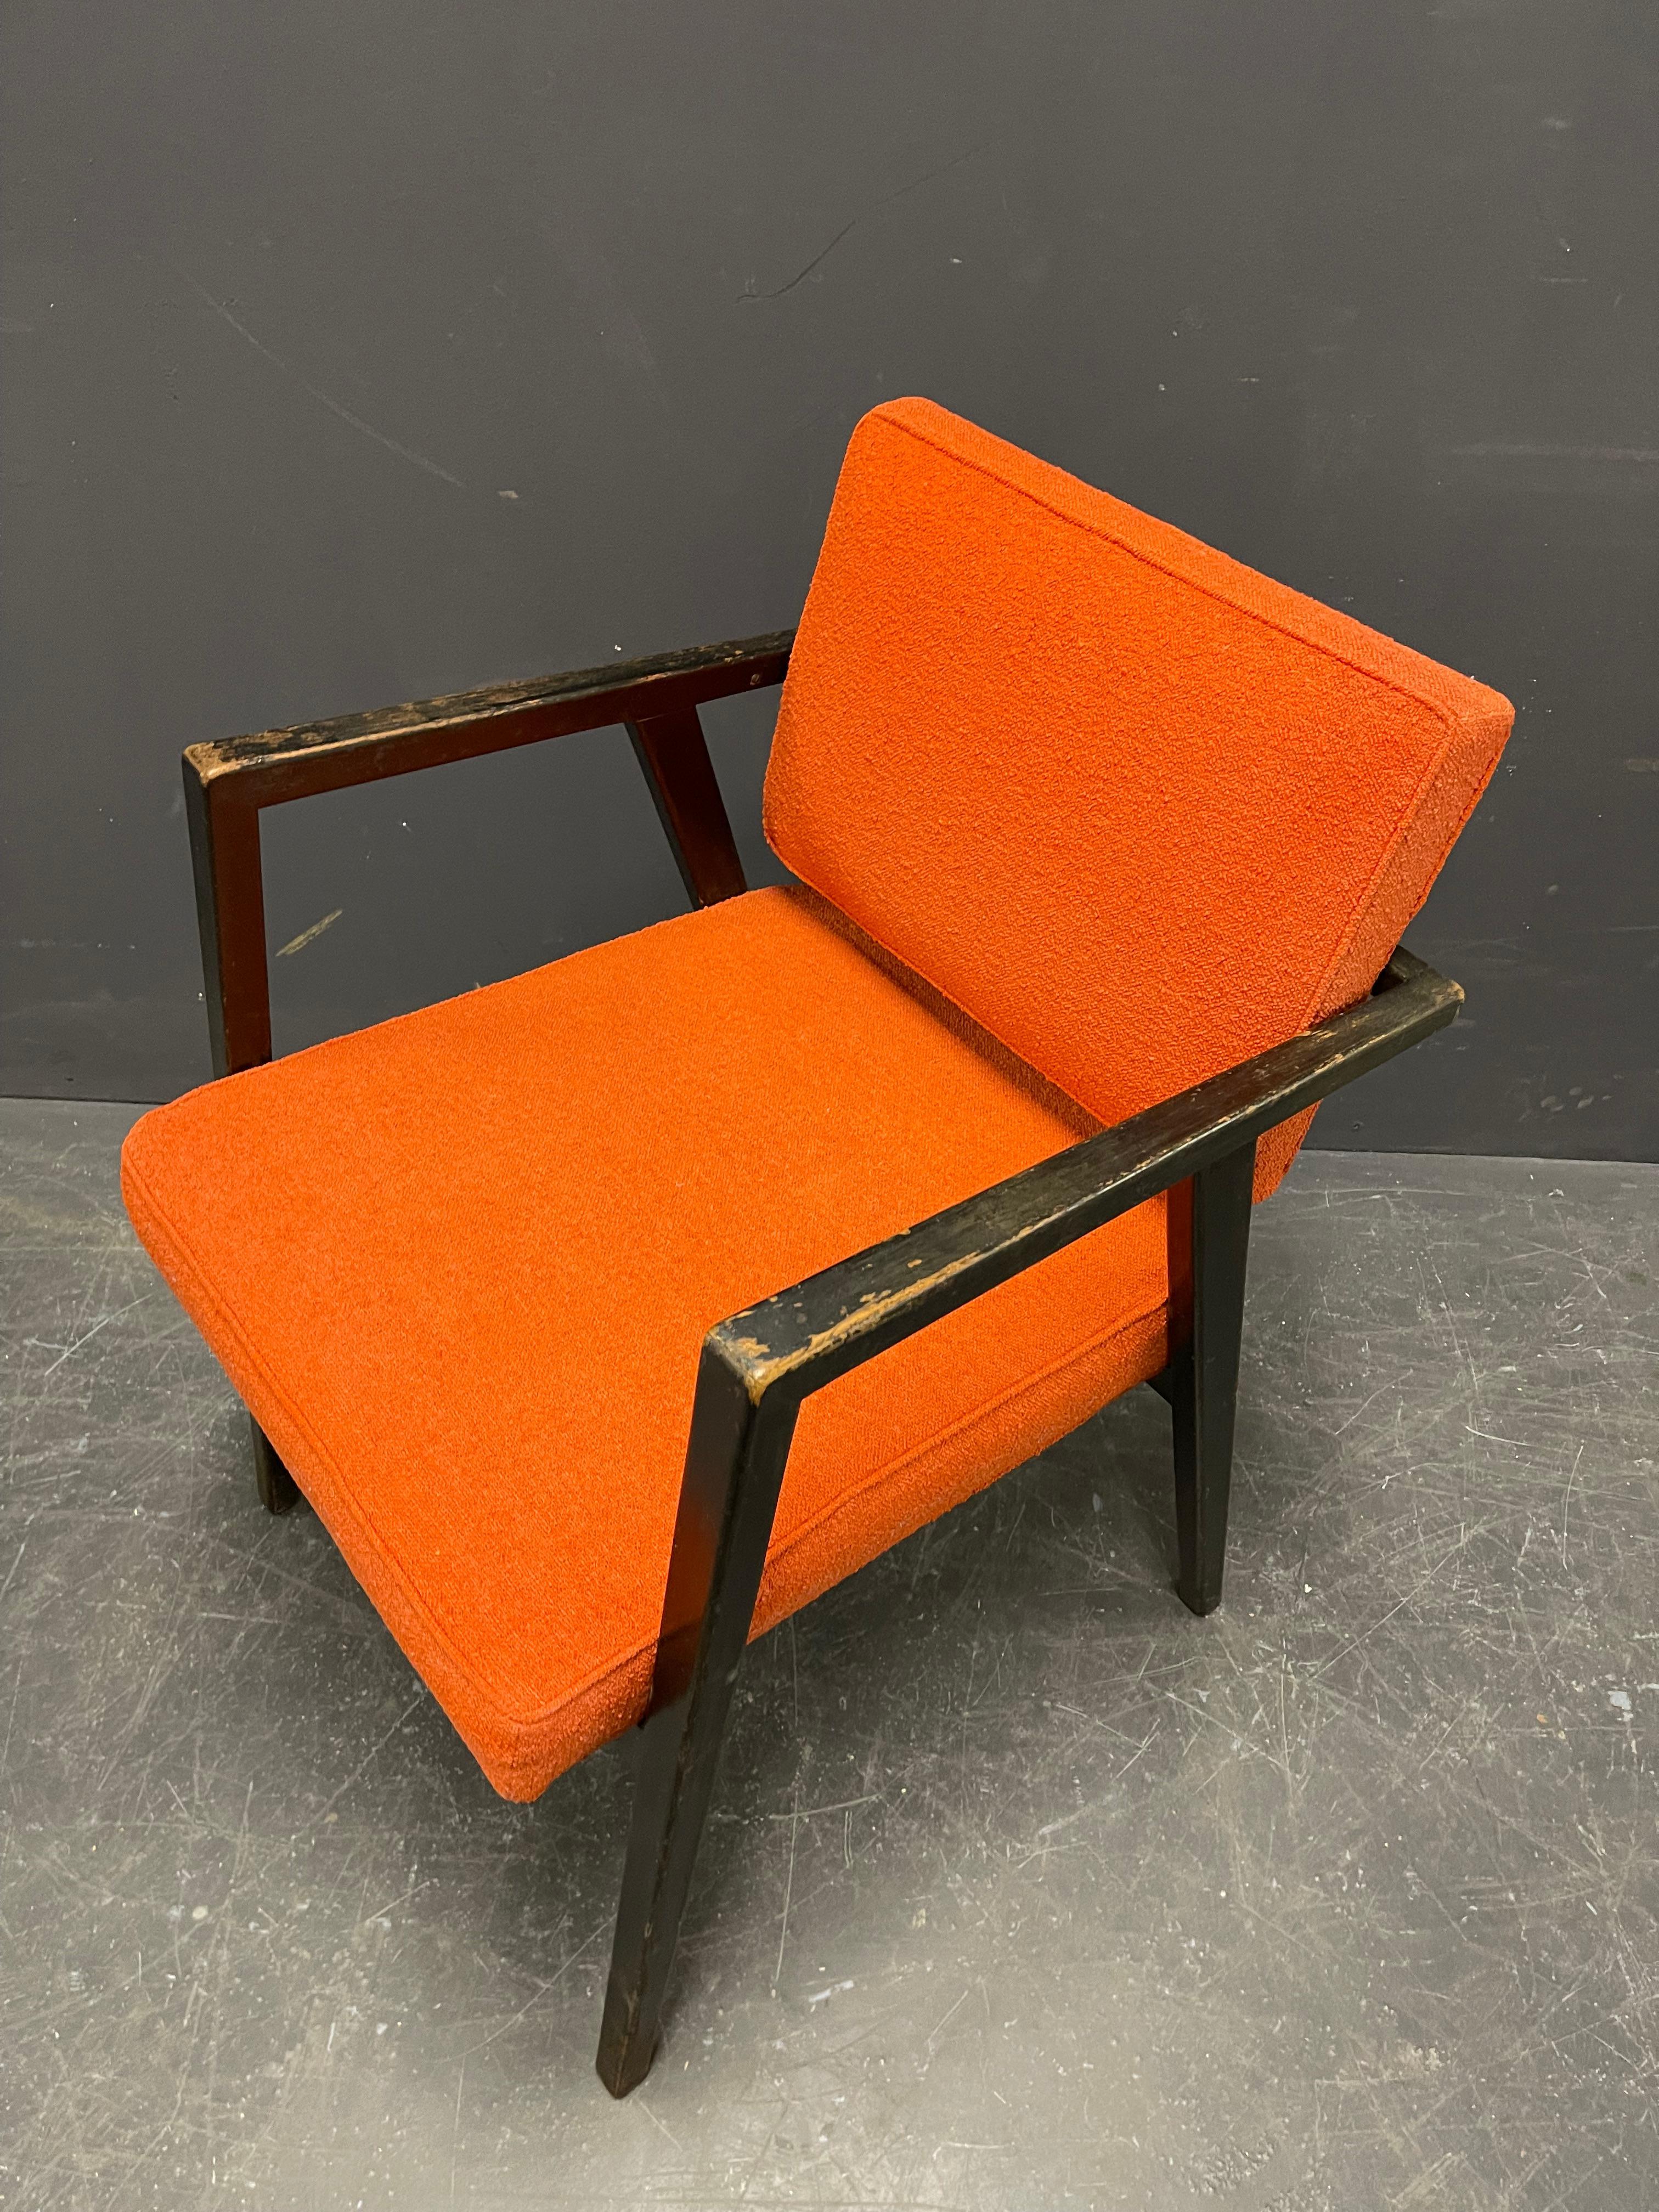 Designed by Franco Albini and made by Knoll International.